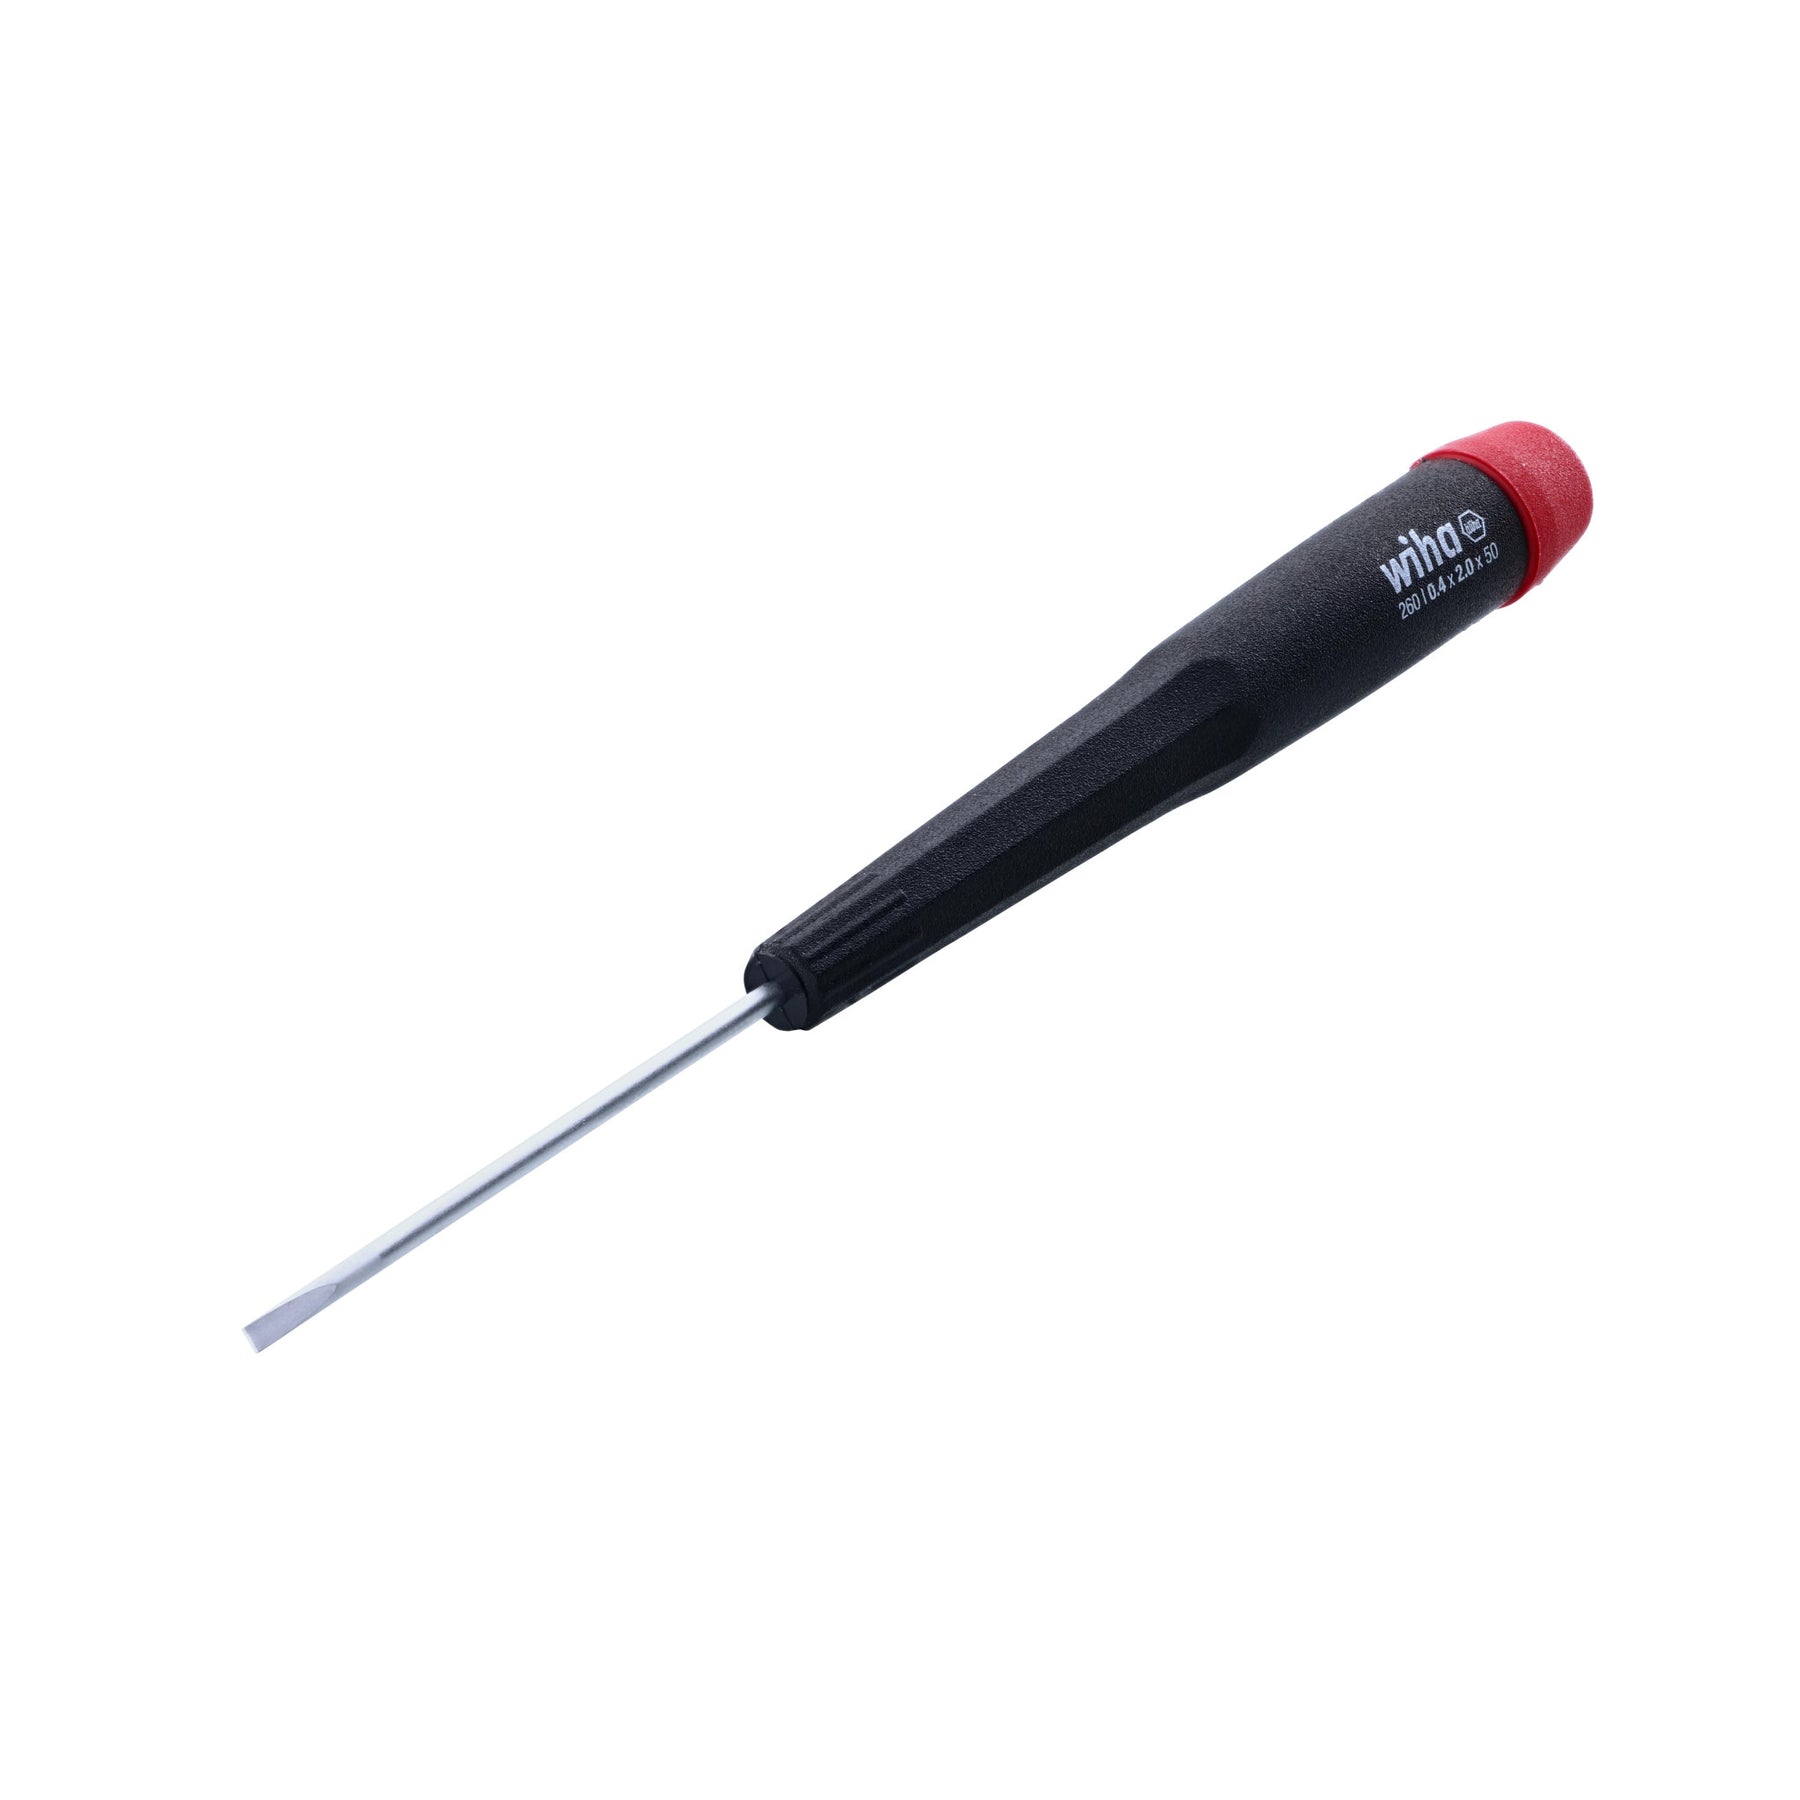 Precision Slotted Screwdrivers